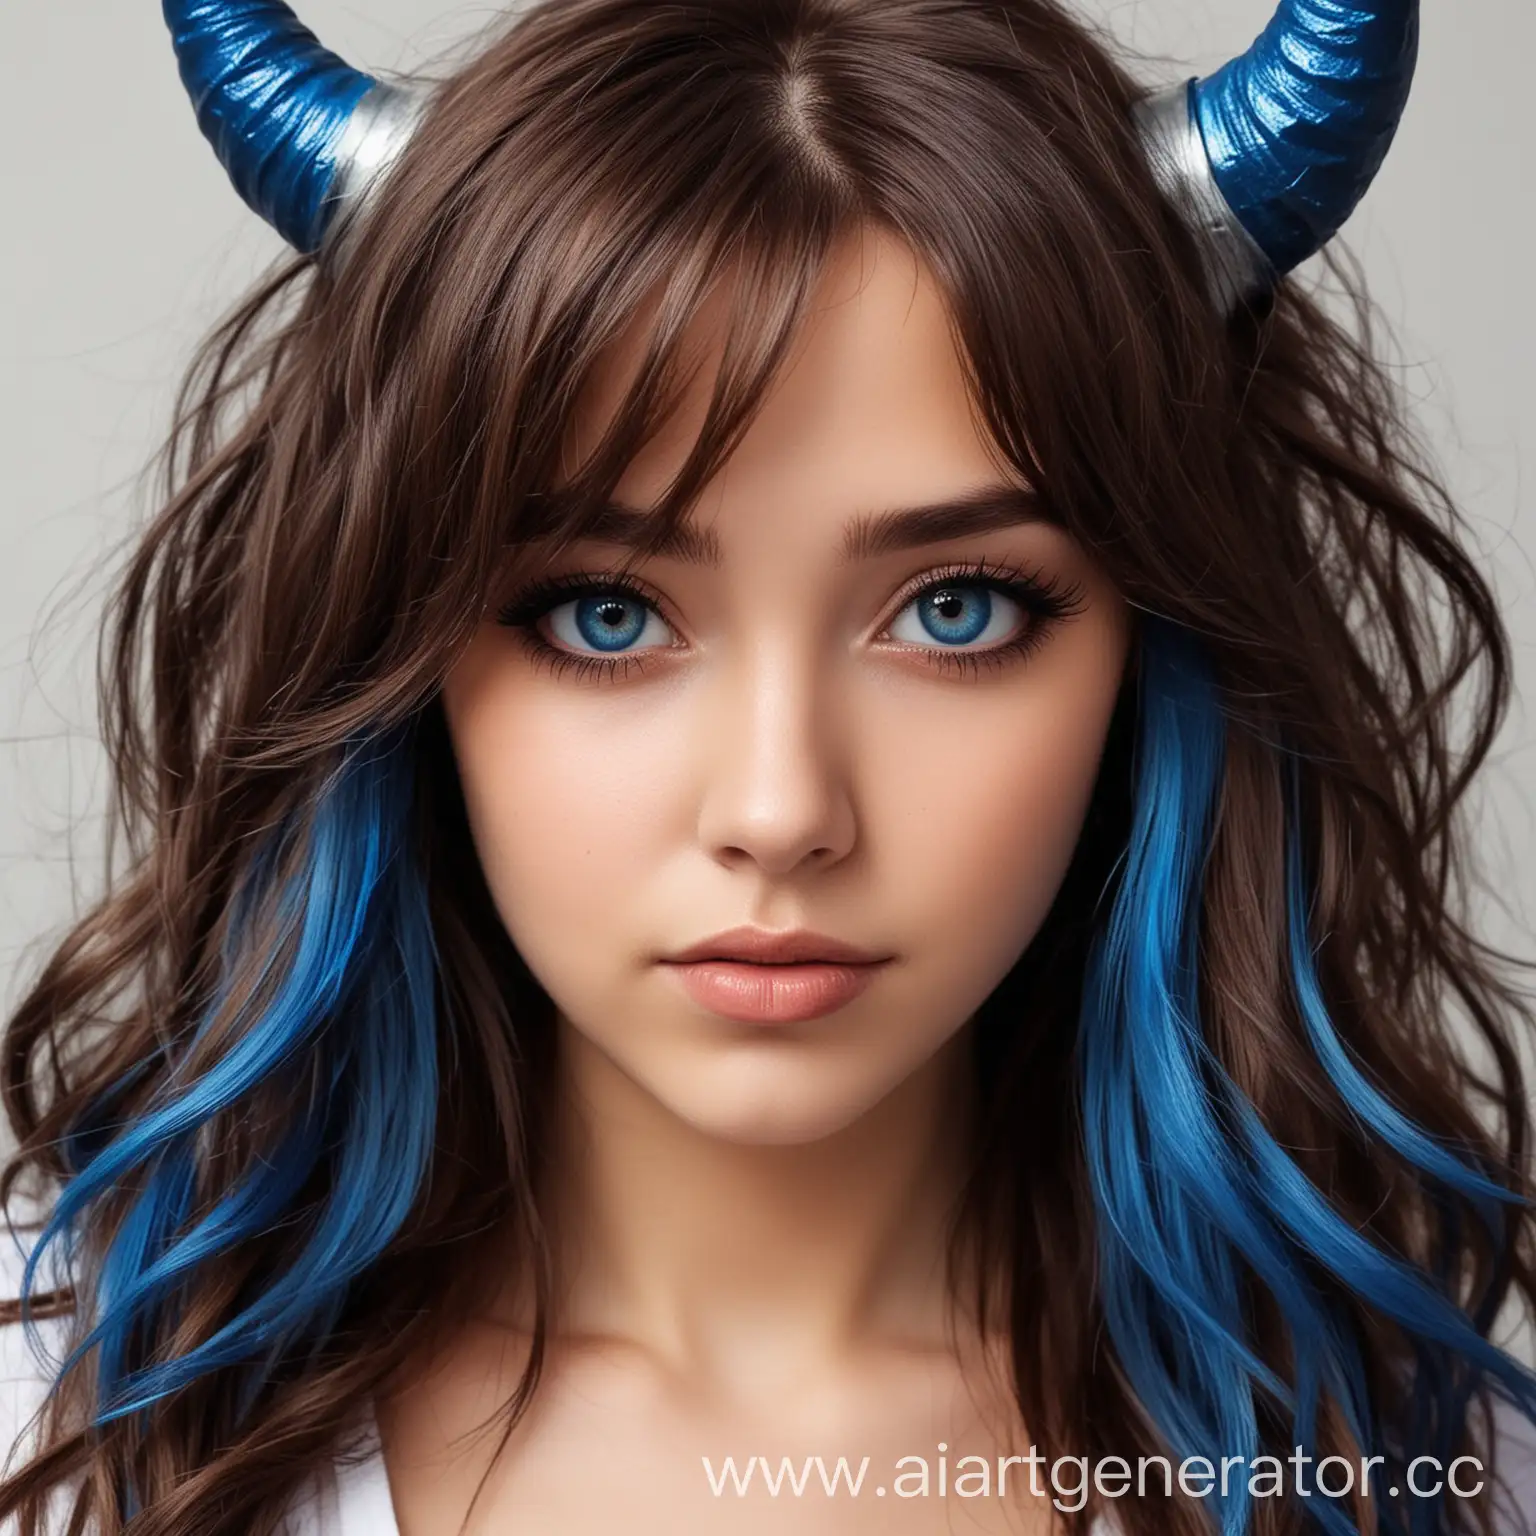 Woman-with-Brown-Hair-and-Blue-Horns-Portrait